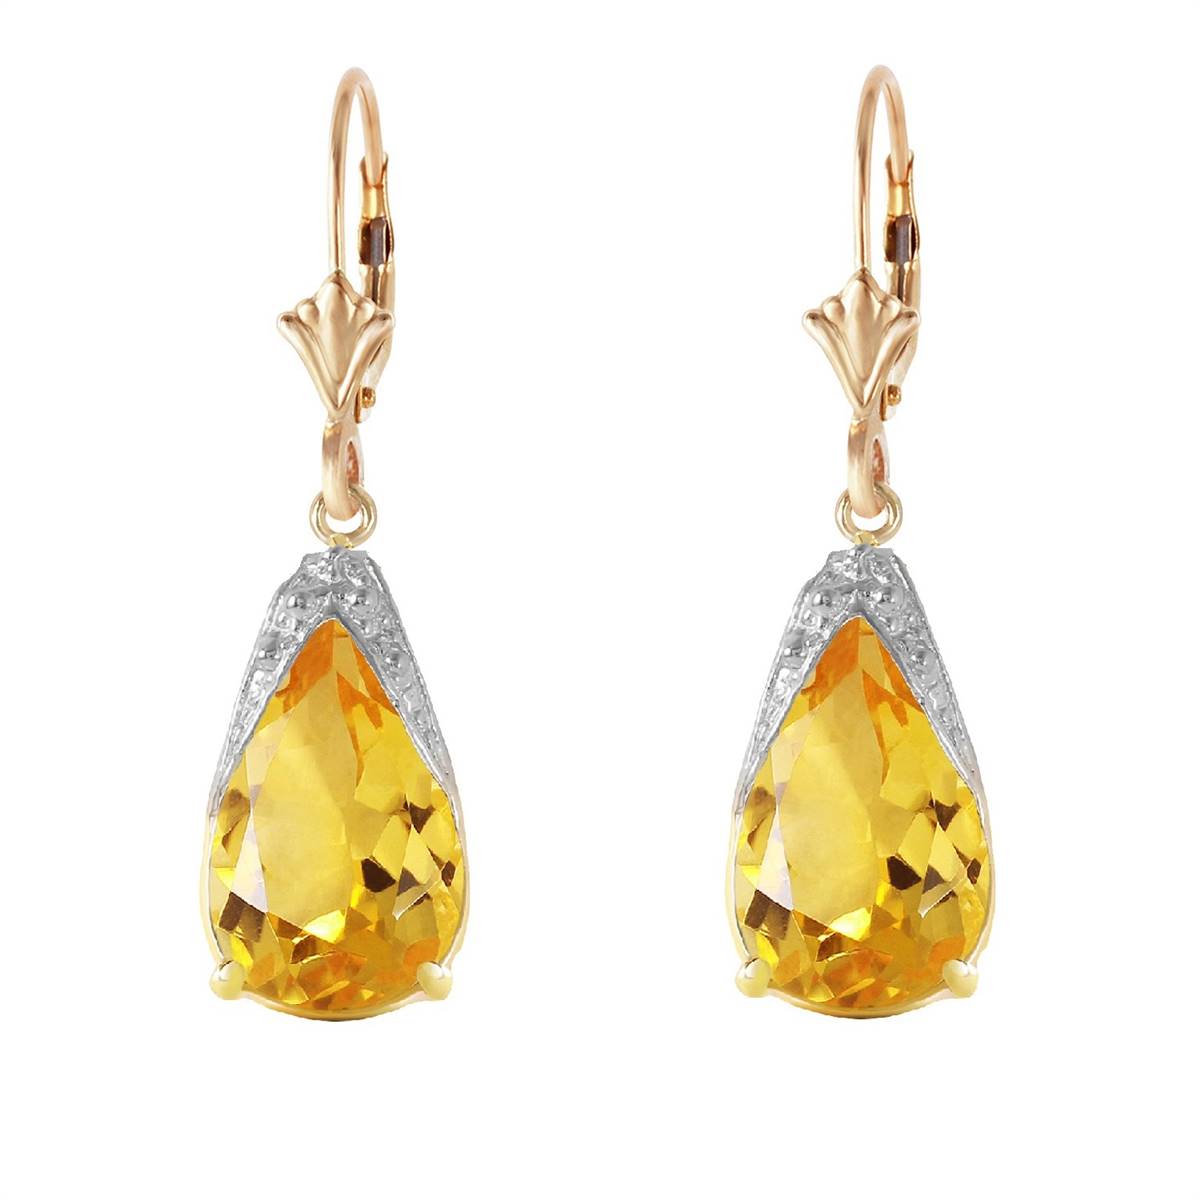 10 Carat 14K Solid Yellow Gold Leverback Citrine Earrings